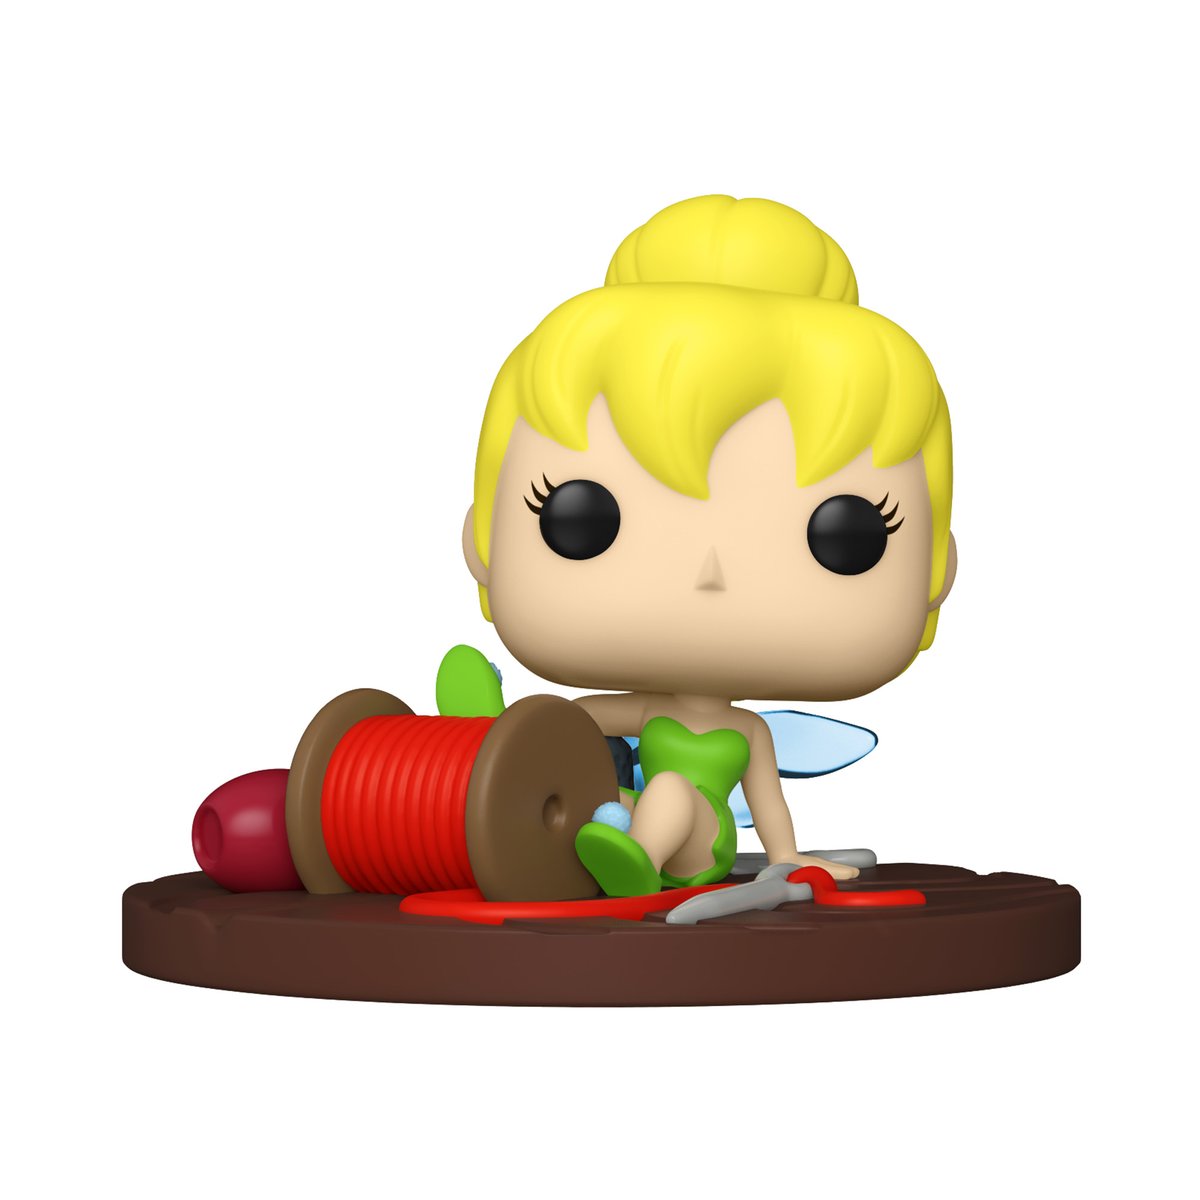 RT and follow @OriginalFunko for the chance to WIN the @BoxLunchGifts exclusive Tinker Bell Pop! Deluxe! #Funko #FunkoPop #Giveaway #Disney